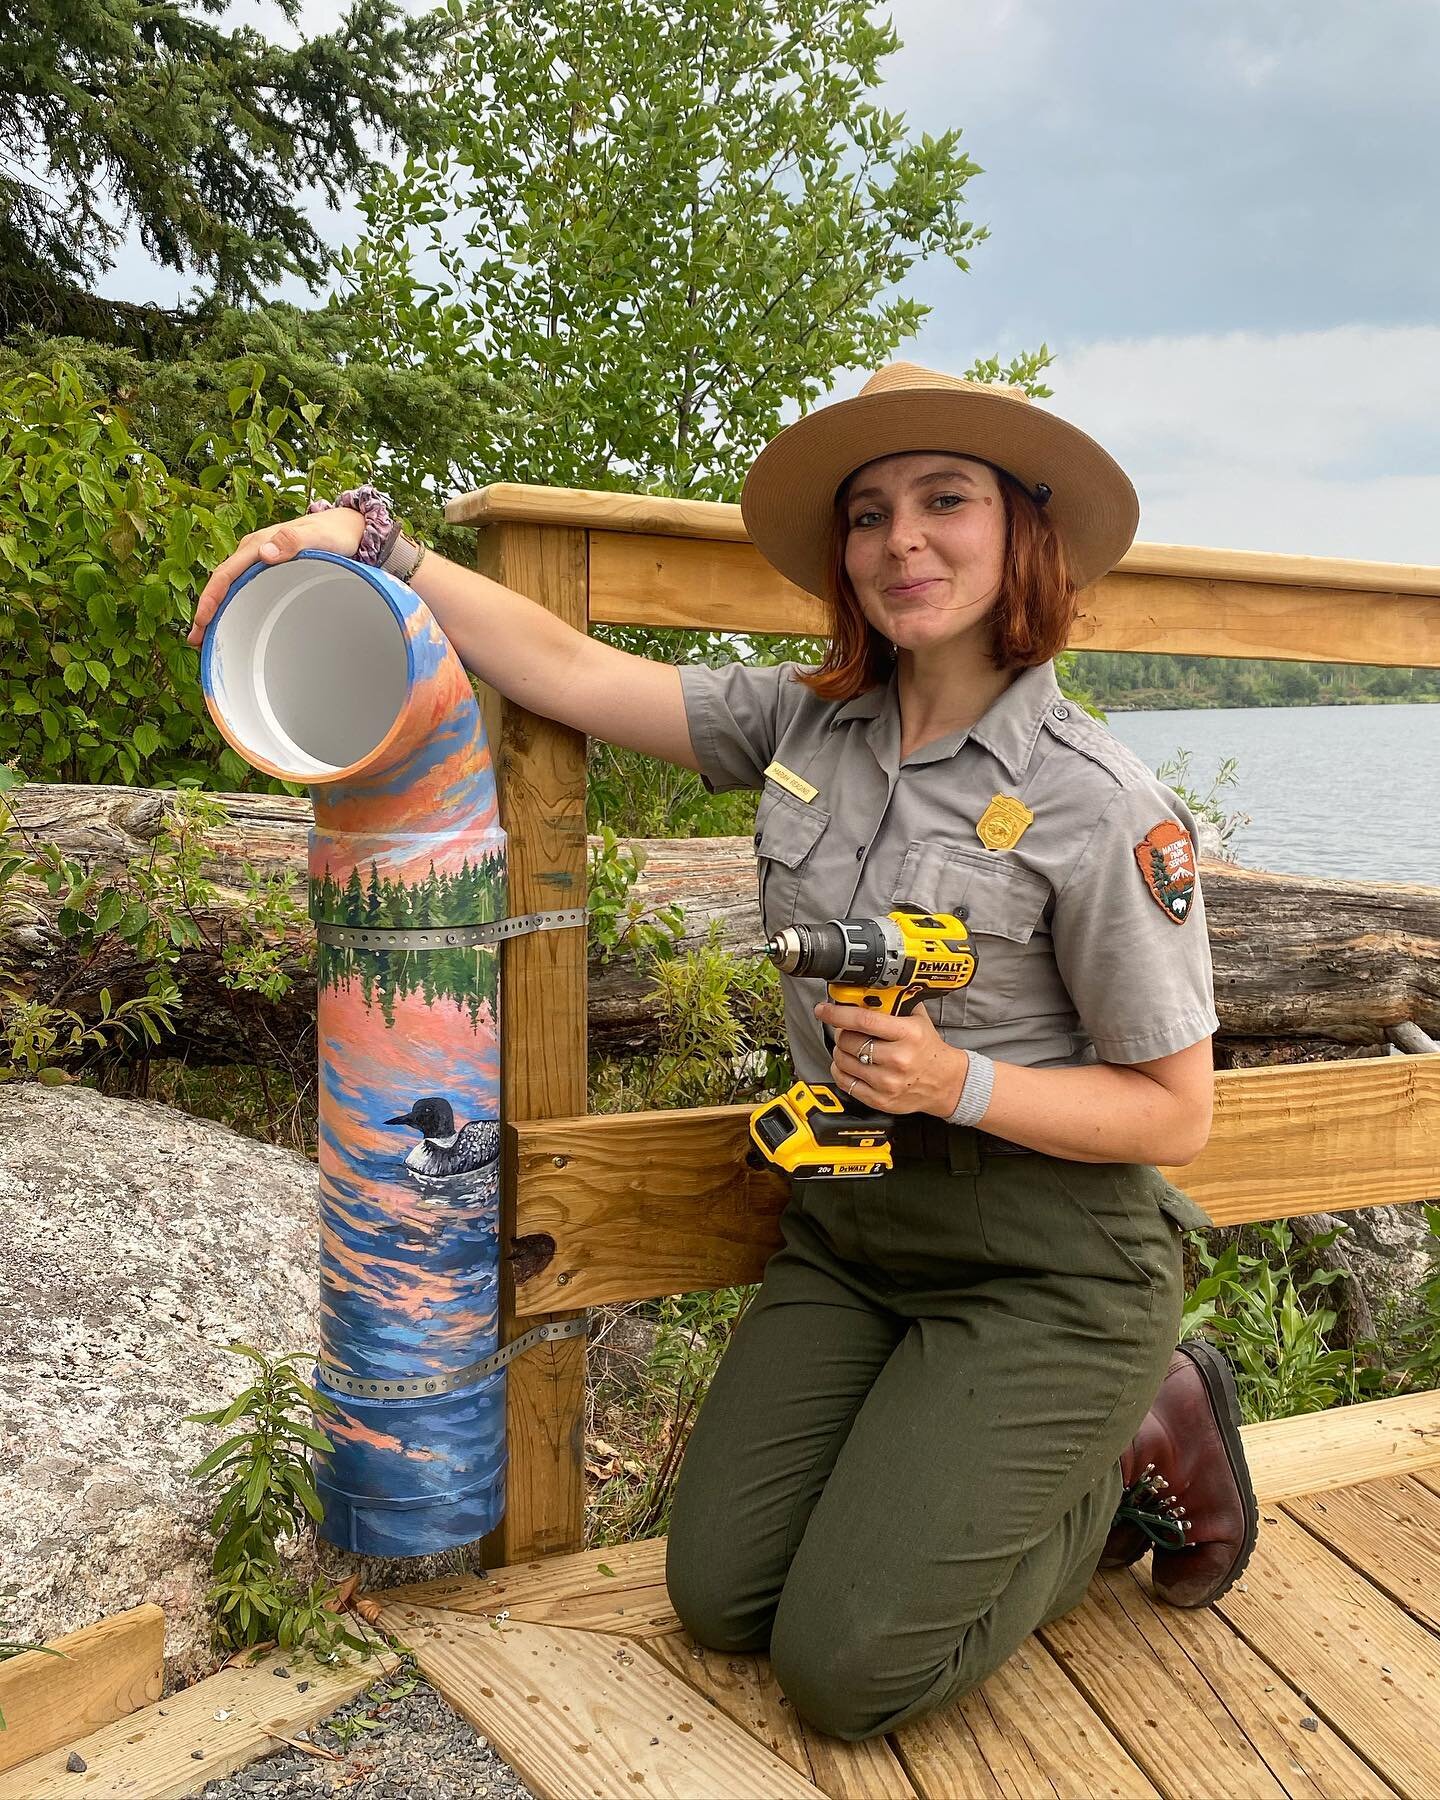 Happy #WorldRangerDay from my painted PVC pipe to yours!!! Got to add some loon pizzaz to a fishing line recycling bin as a part of our brand new fishing dock in @voyageursnps . Feeling very grateful to work in an environment where everyone can  util